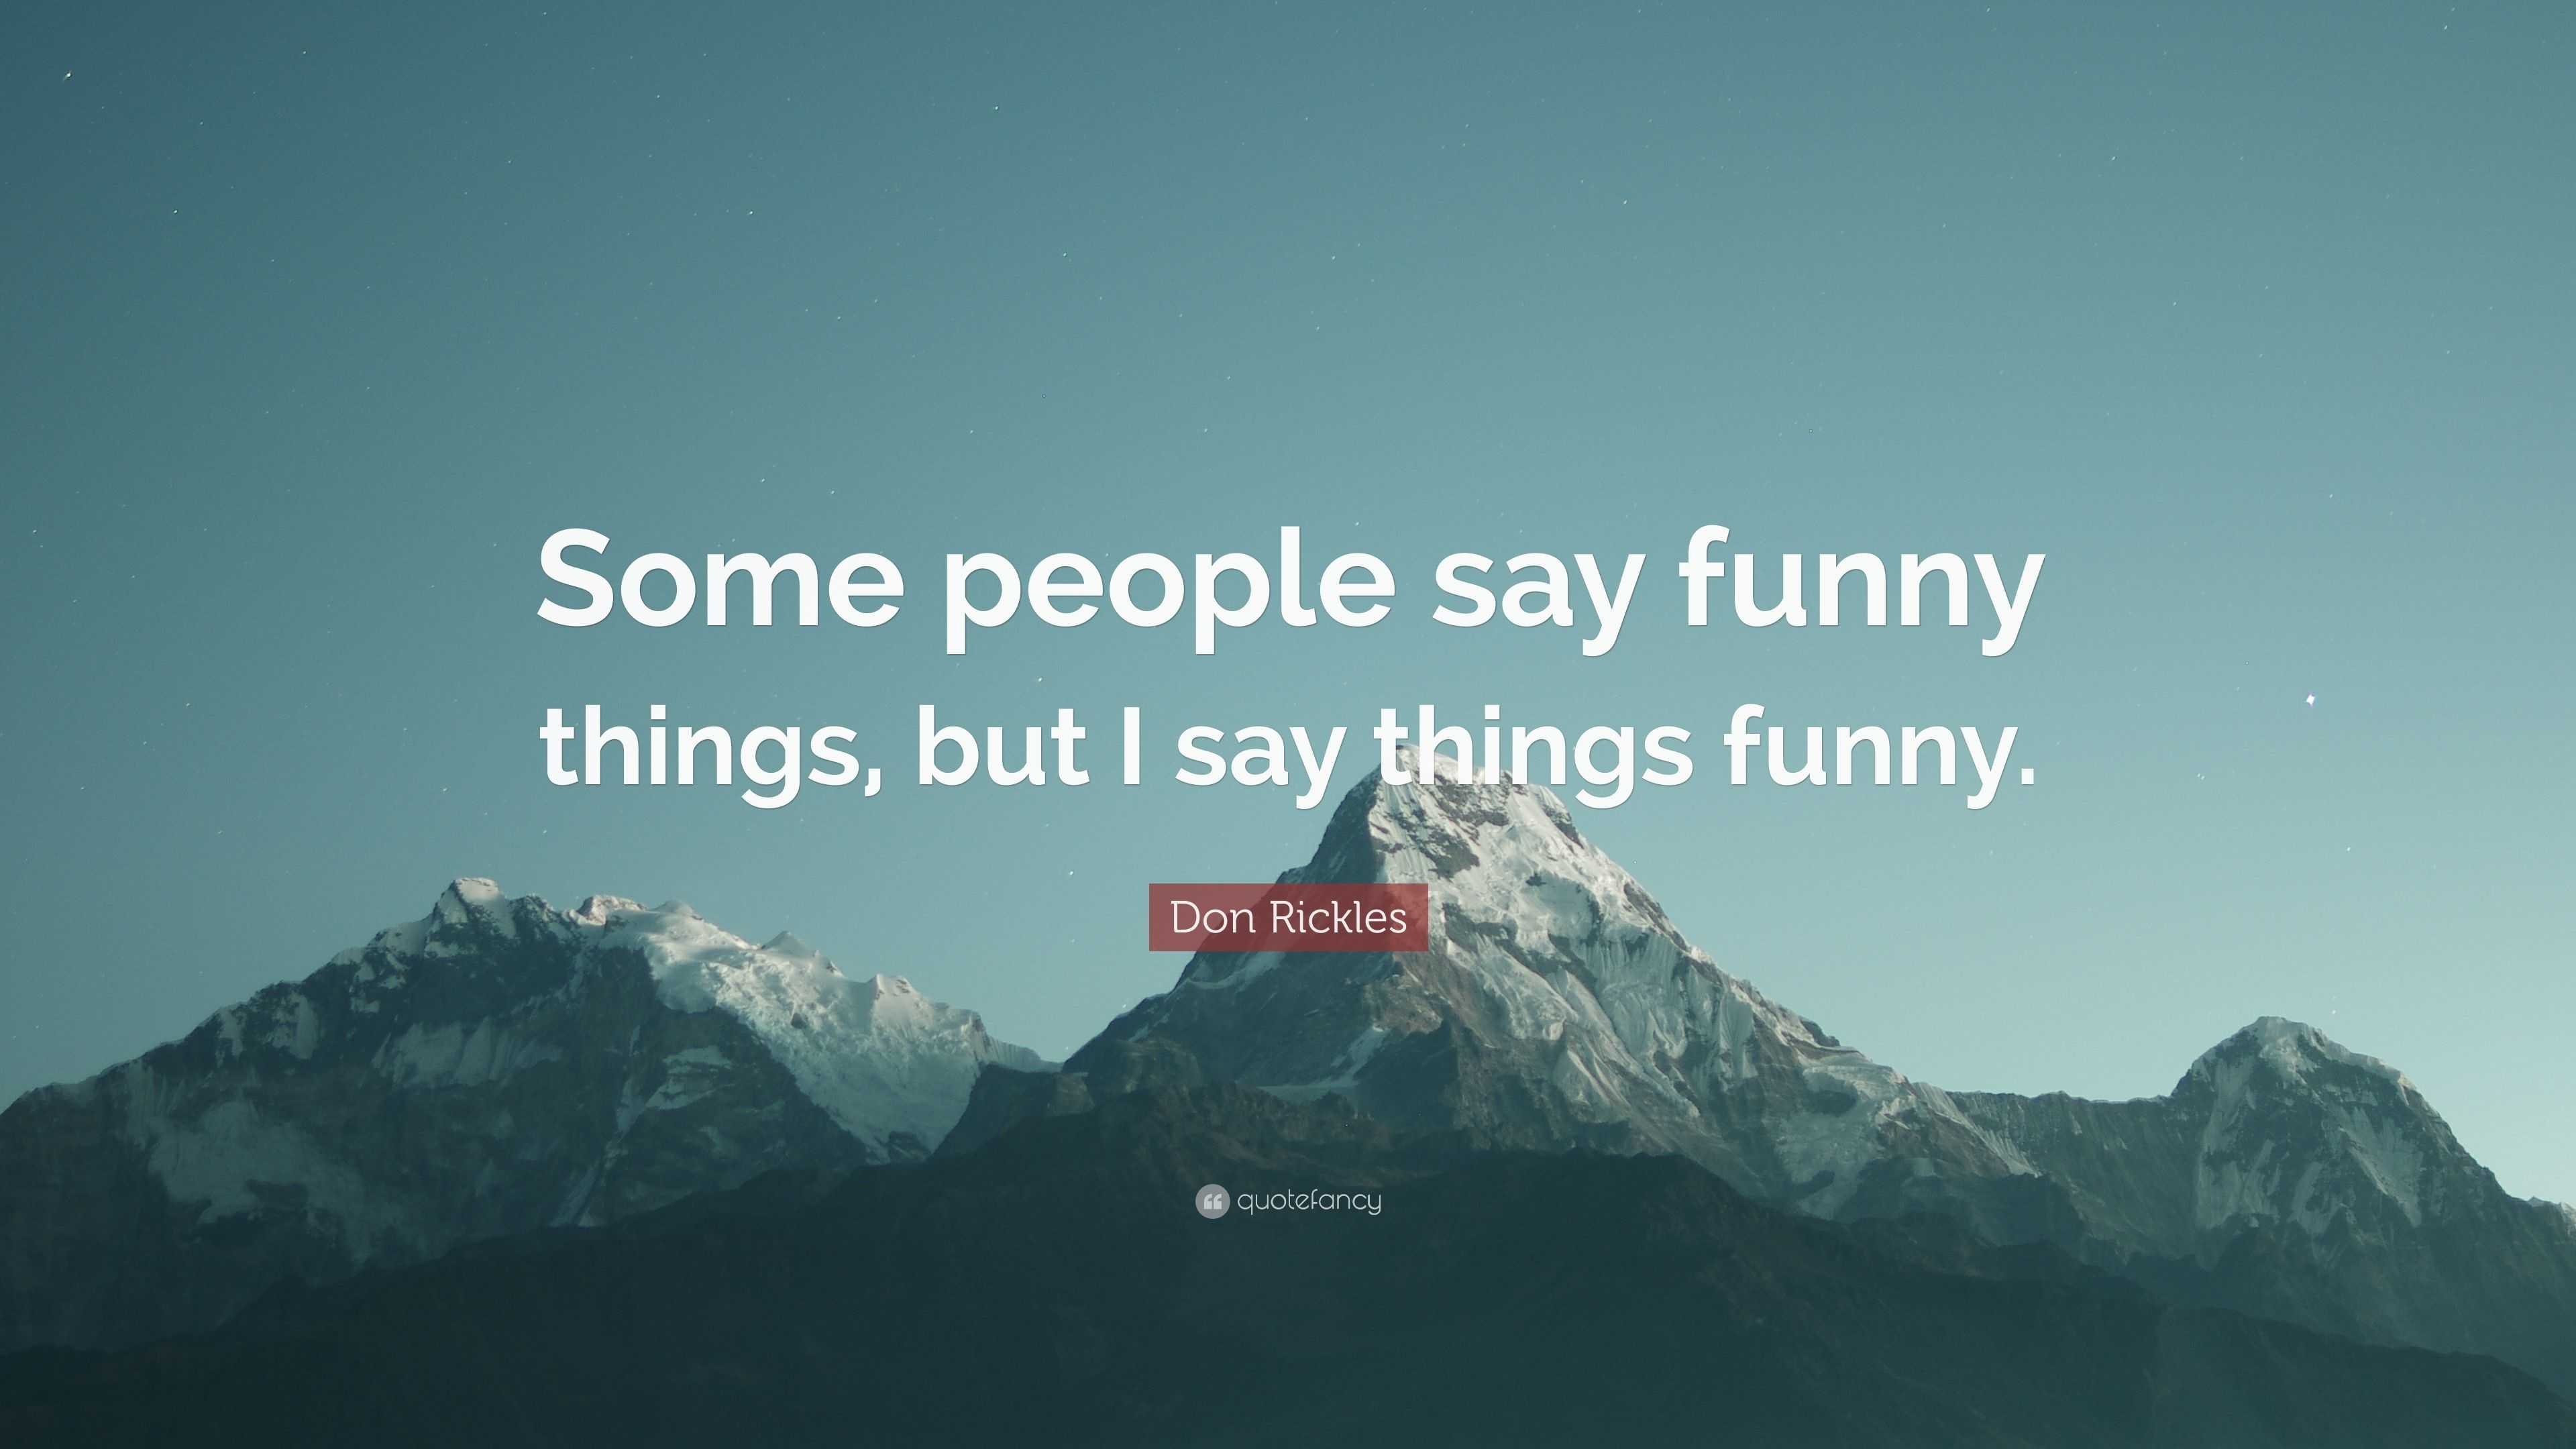 Don Rickles Quote: “Some people say funny things, but I say things funny.”